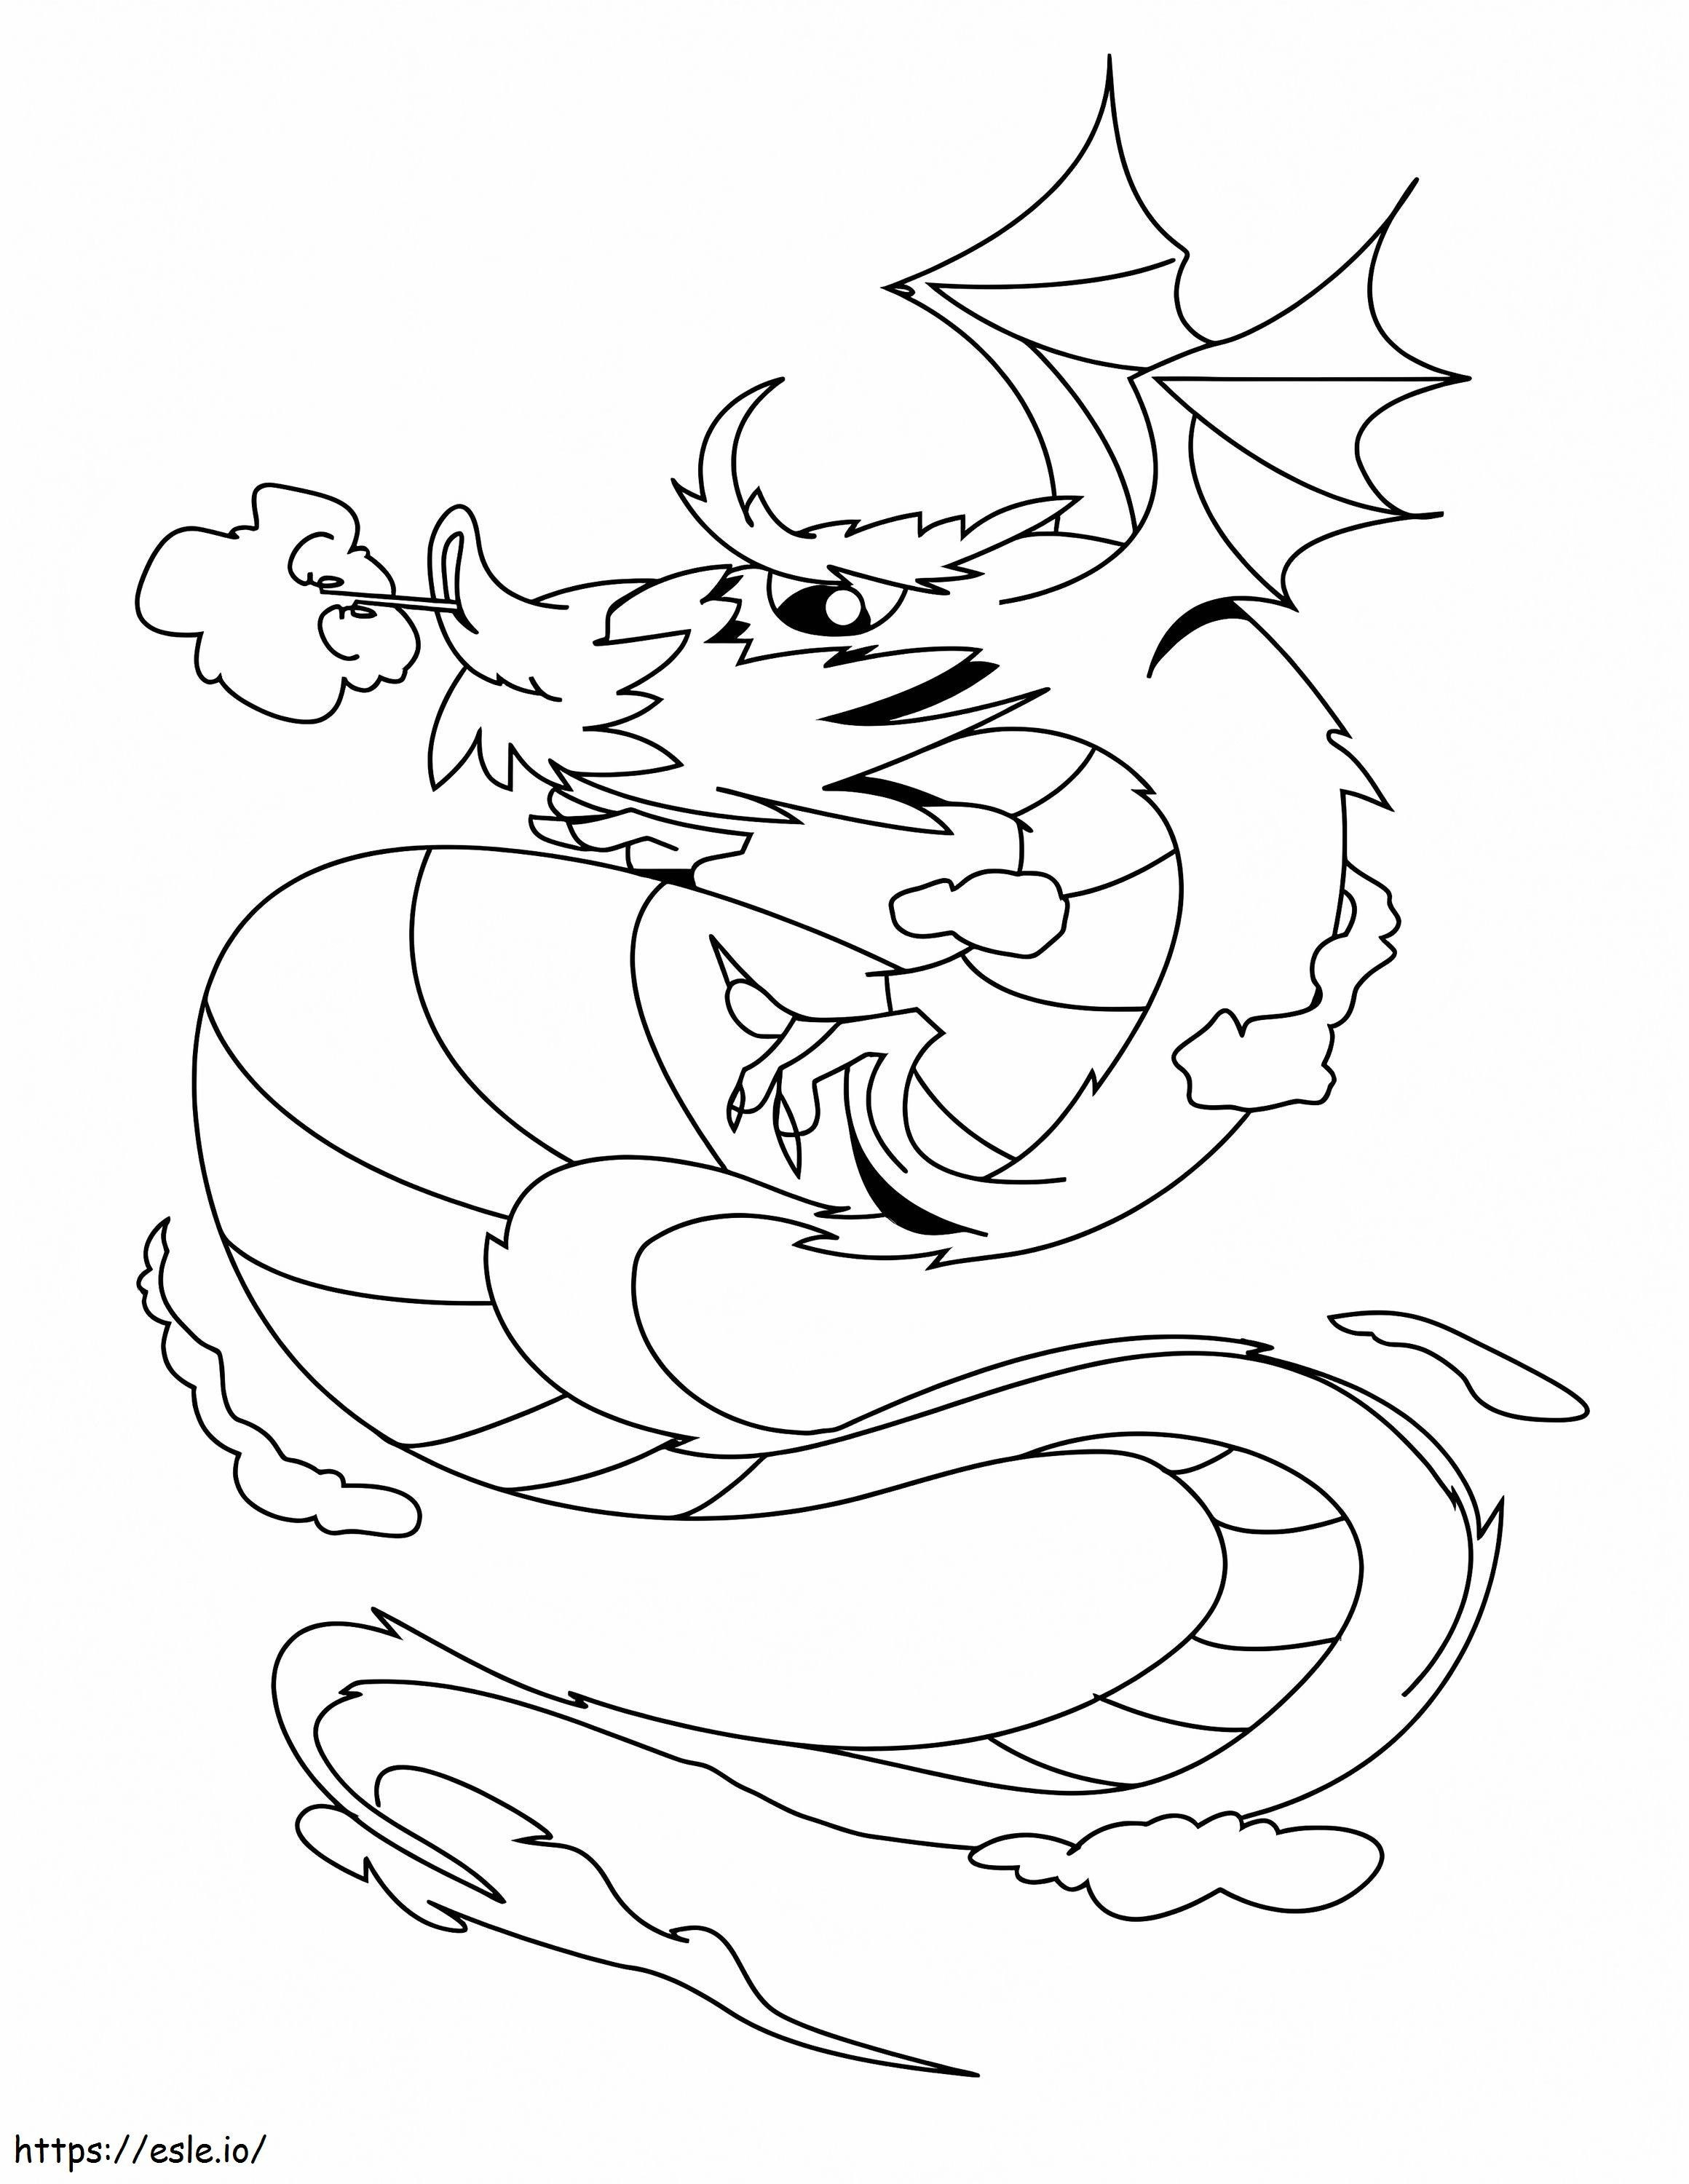 Chinese Dragon 2 coloring page